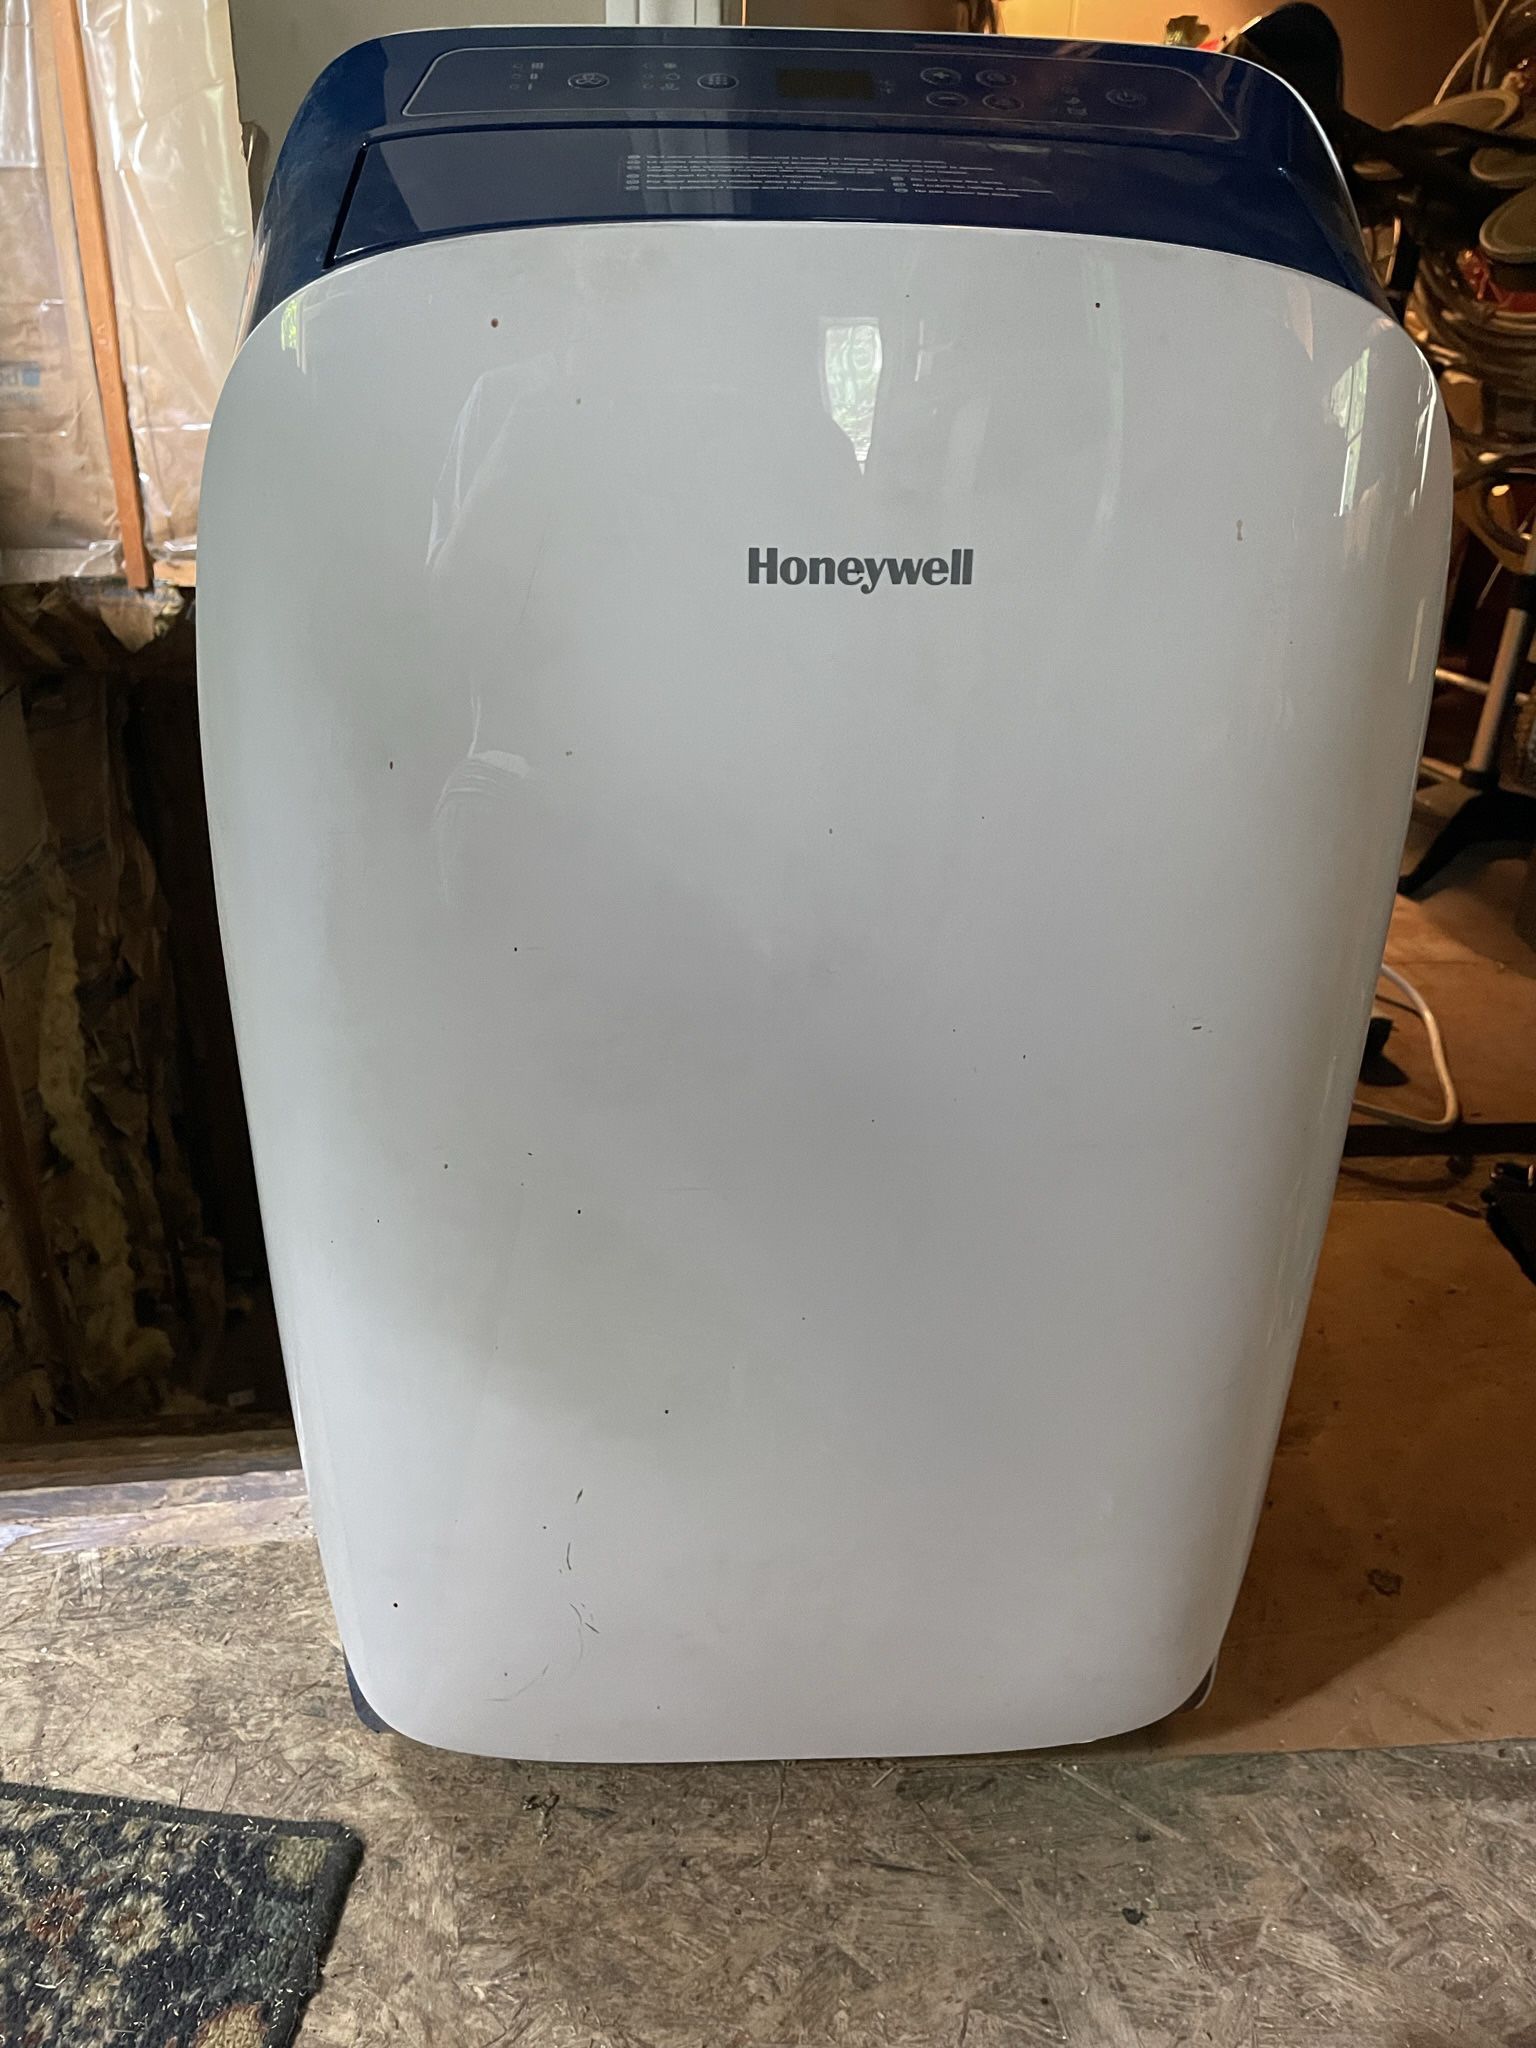 Brand New Air Conditioner / Dehumidifier With Remote